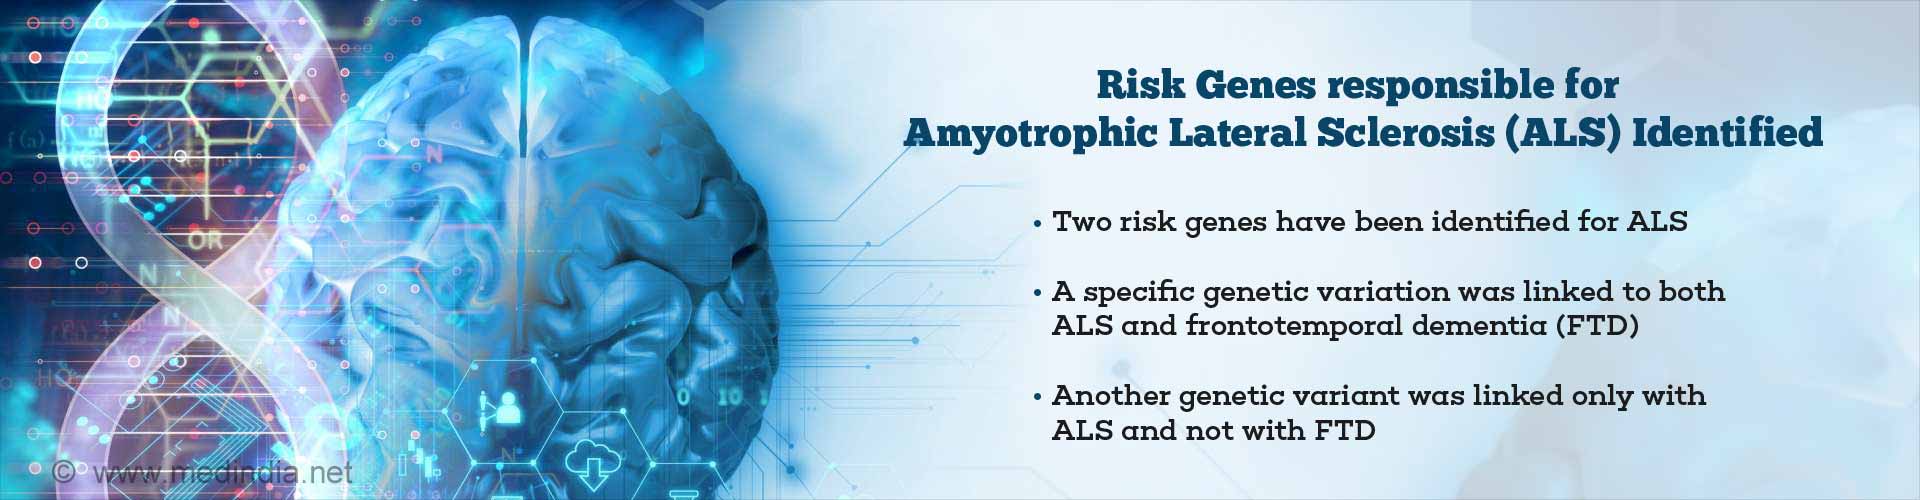 risk genes responsible for amyotrophic lateral sclerosis (ALS) identified
- two risk genes have been identified for ALS
- a specific genetic variation was linked to both ALS and frontotemporal dementia (FTD)
- Another genetic variant as linked only with ALS and not with FTD